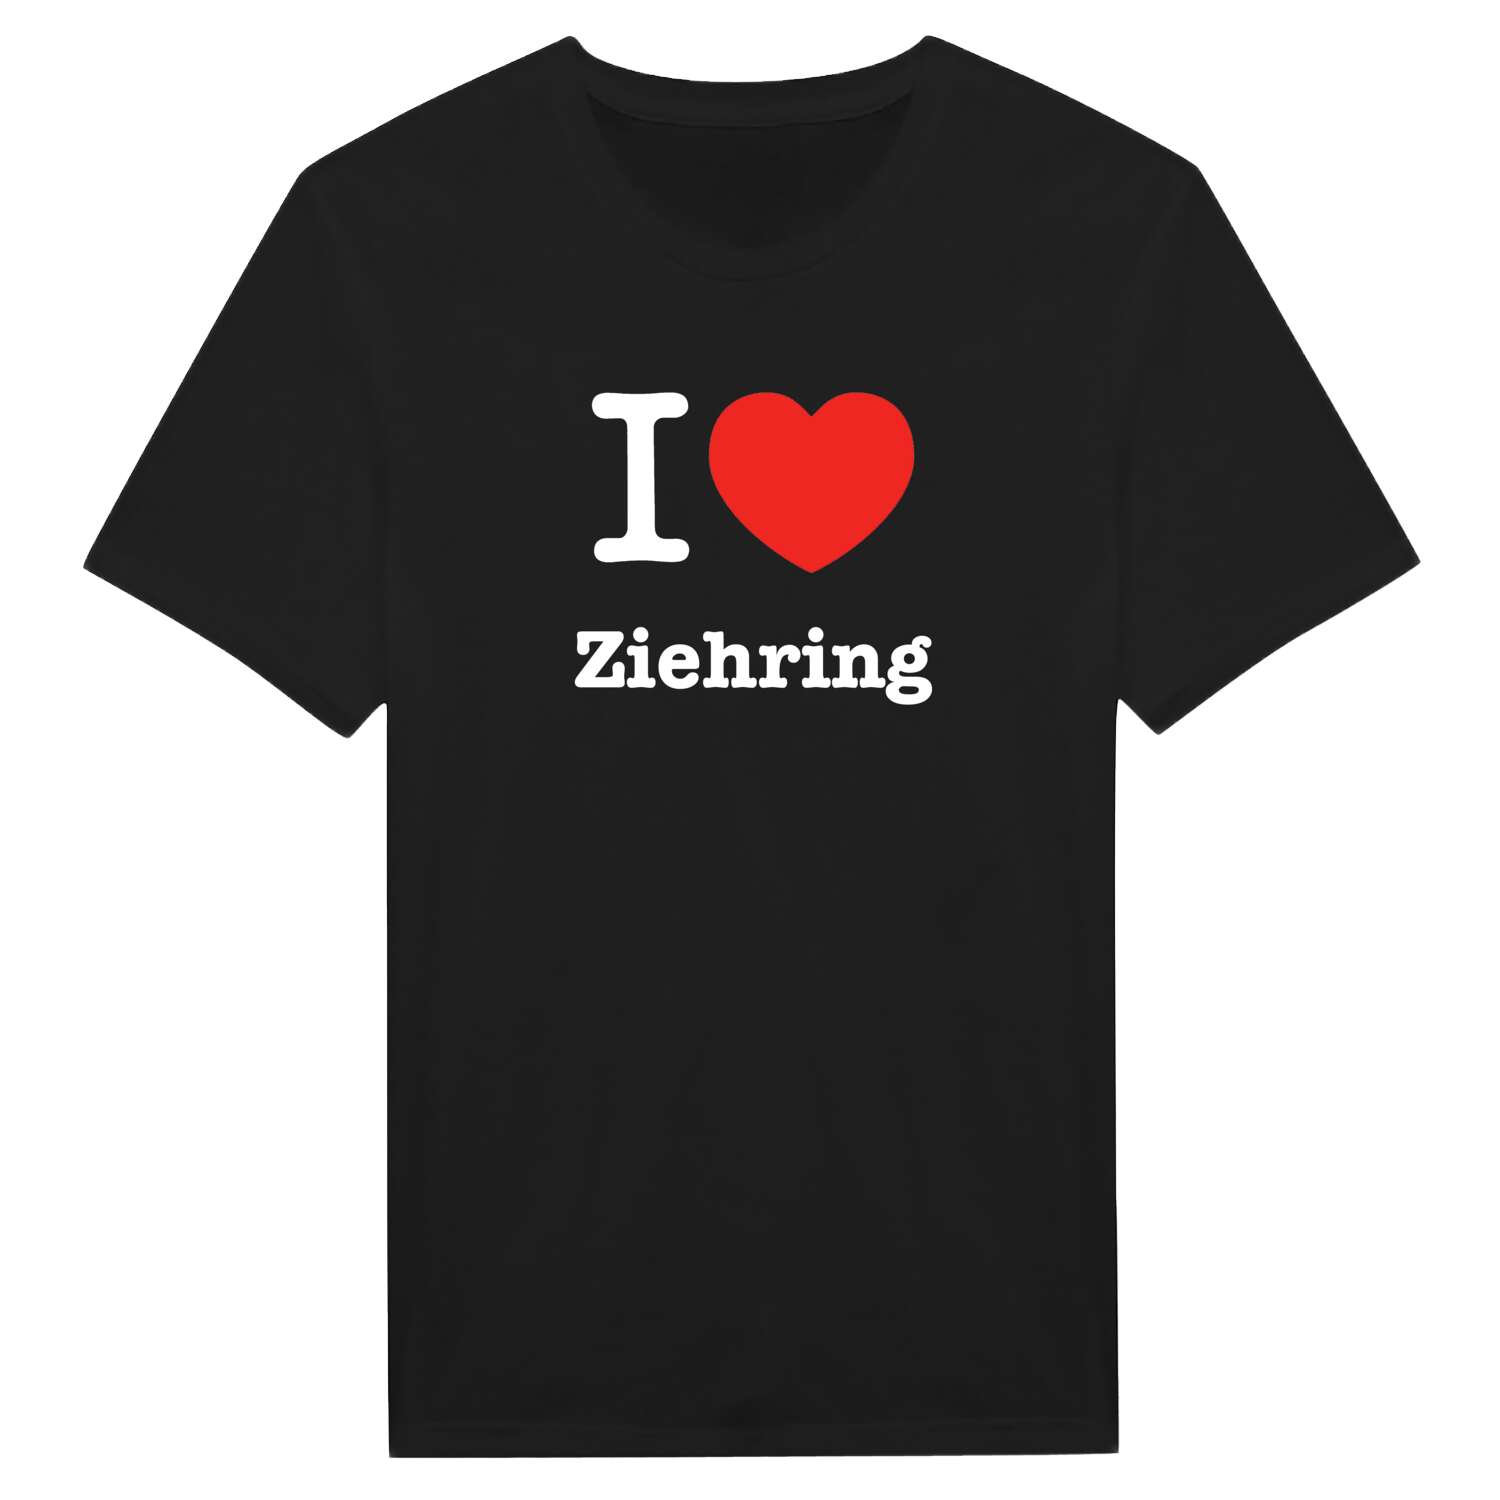 Ziehring T-Shirt »I love«